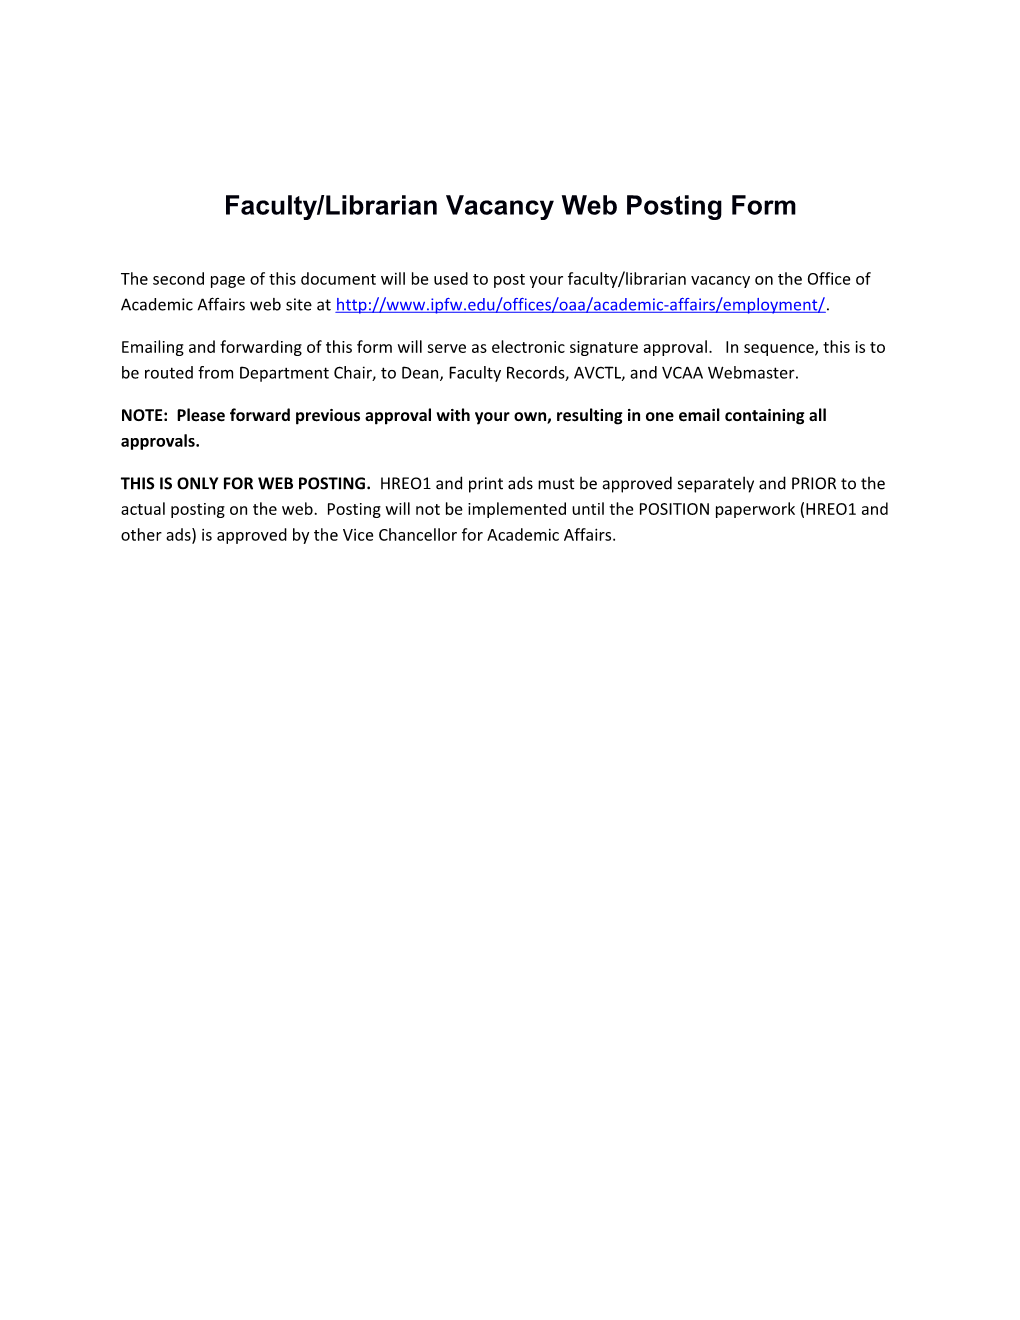 Faculty/Librarian Vacancy Web Posting Form